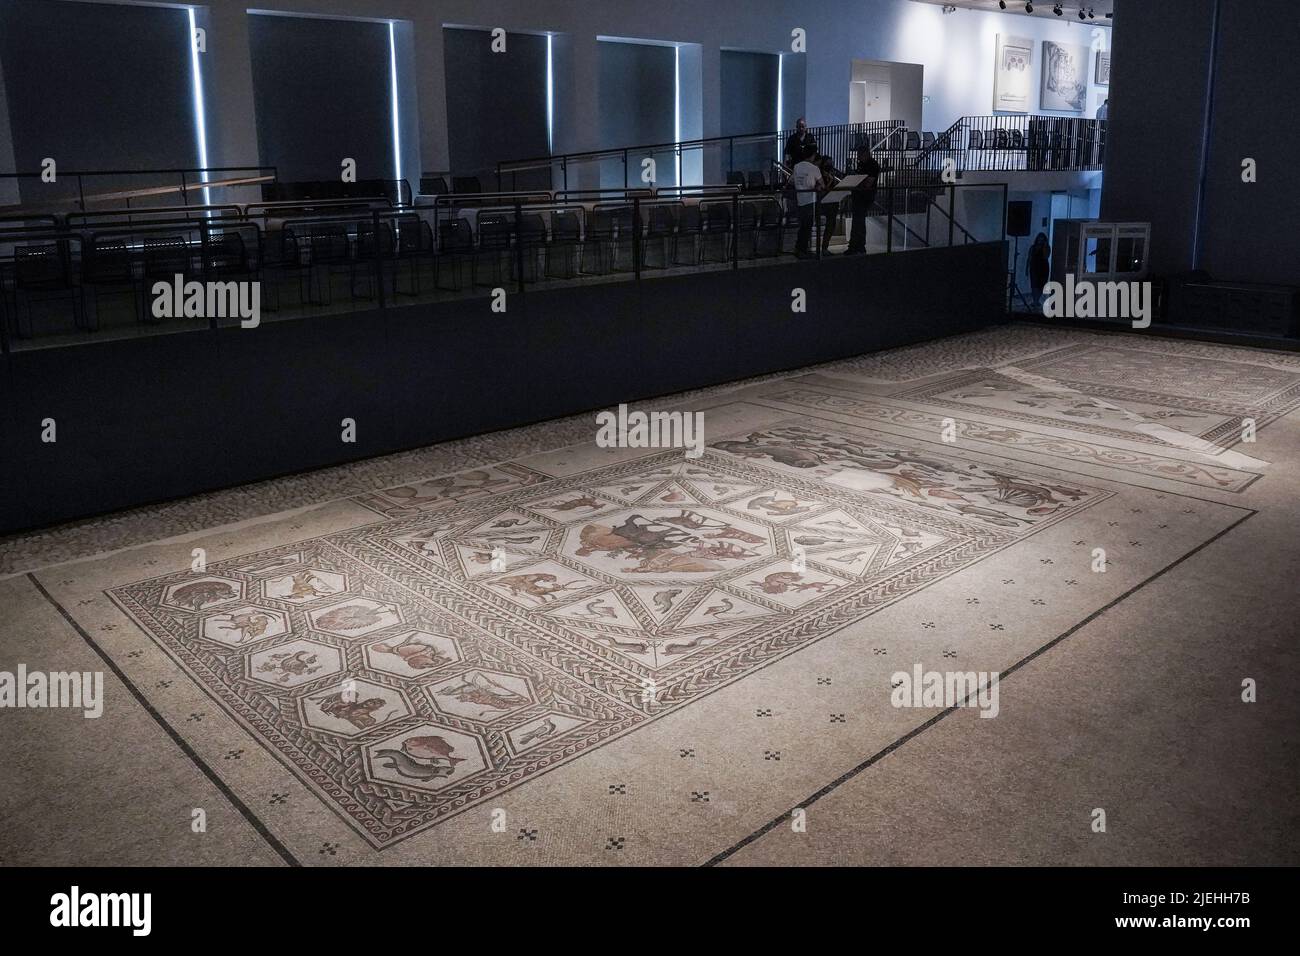 https://c8.alamy.com/comp/2JEHH7B/lod-israel-27th-june-2022-the-israel-antiquities-authority-inaugurates-the-shelby-white-and-leon-levy-lod-mosaic-archaeological-center-the-centers-goal-is-to-display-a-1710-square-foot-roman-period-3rd-to-4th-century-ce-mosaic-which-served-as-the-floor-of-a-living-room-villa-in-a-wealthy-housing-complex-in-lod-credit-nir-alonalamy-live-news-2JEHH7B.jpg